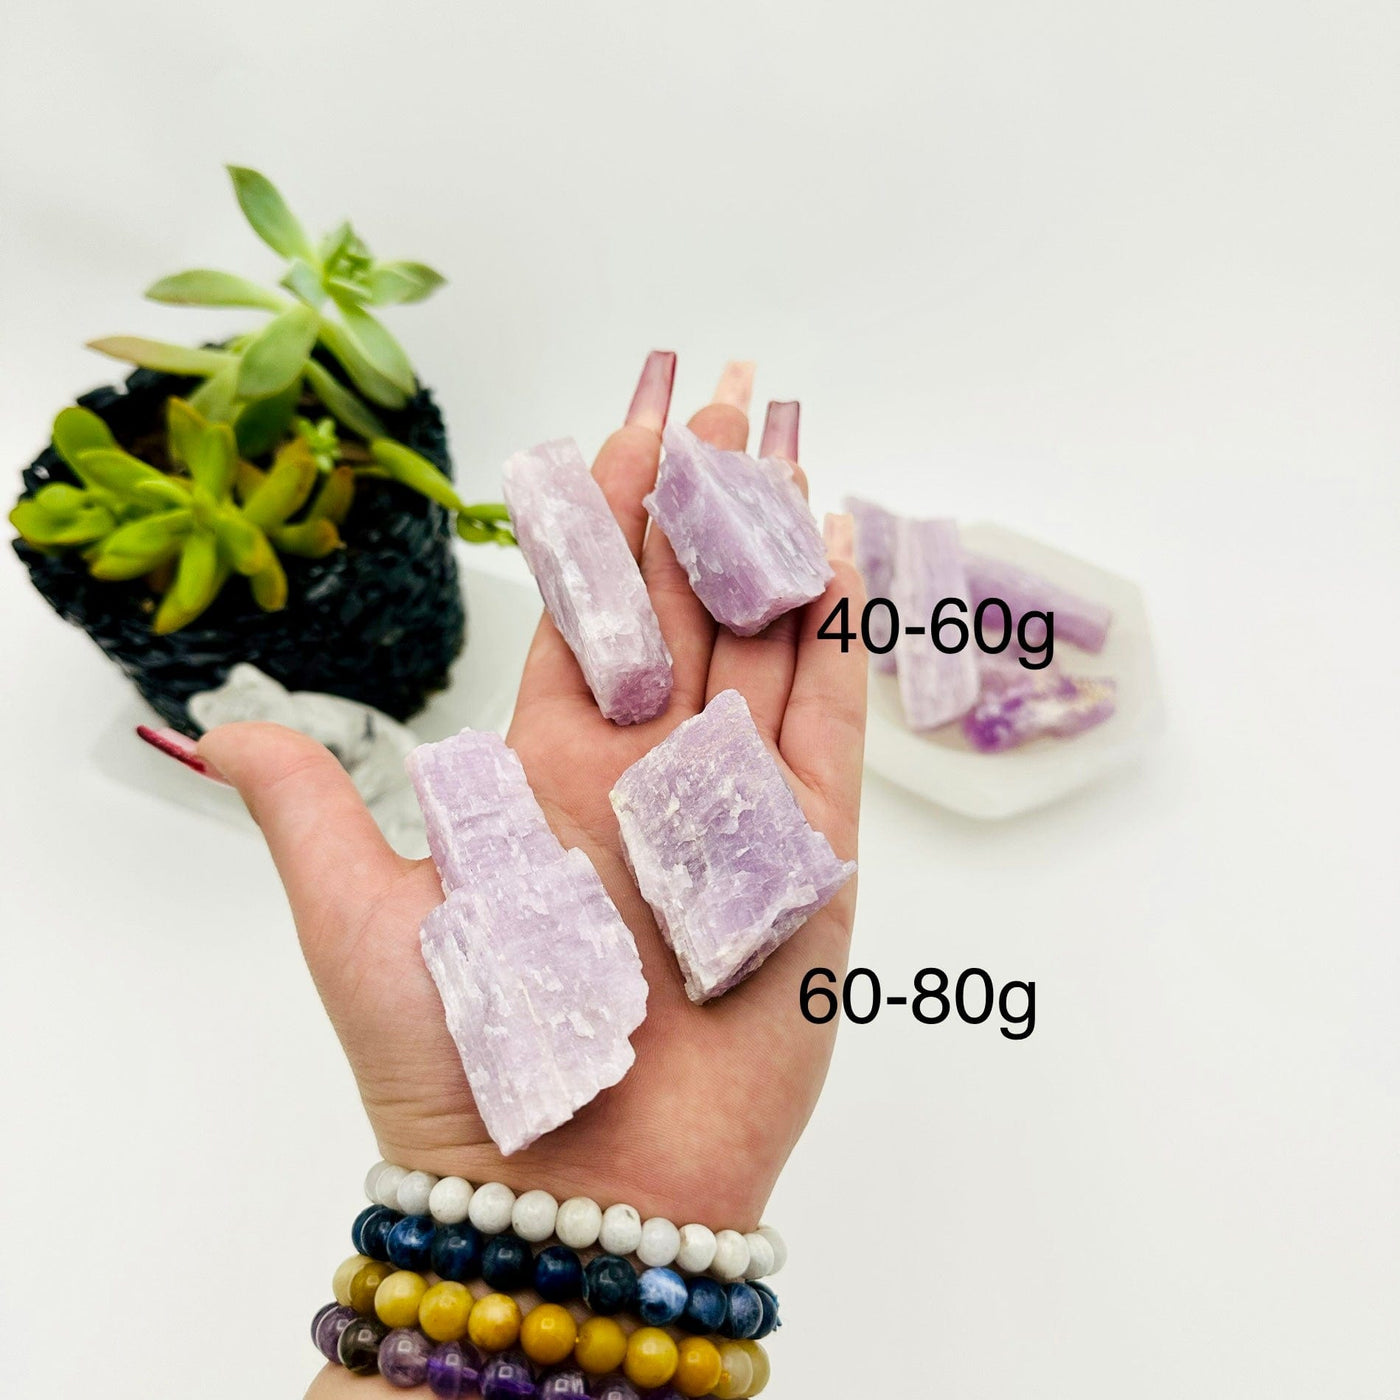  RAW KUNZITE - BY WEIGHT - four rocks in hand showing size for weights 40-60g and 60-80g 